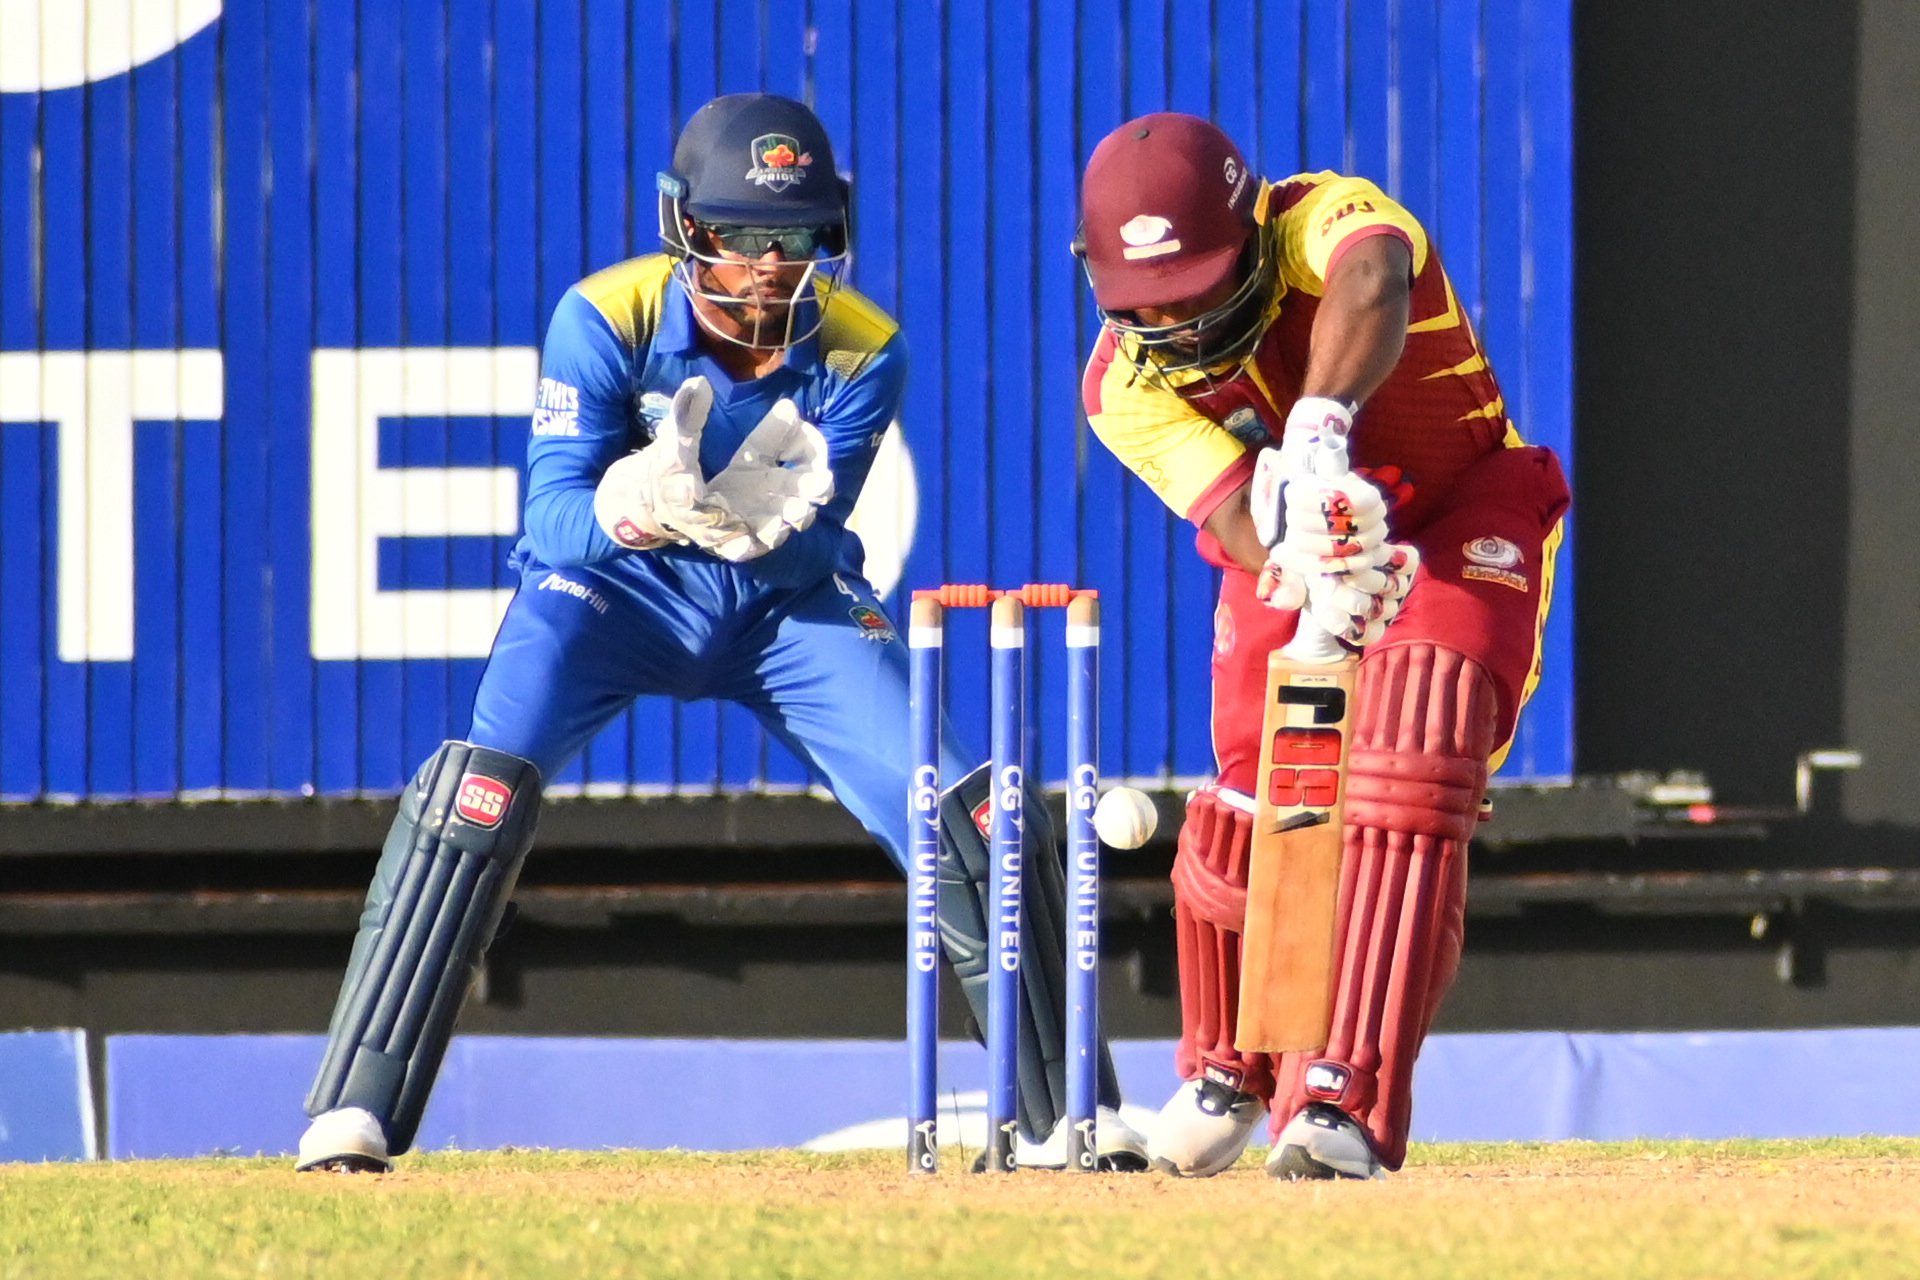 CWI to invest US$2.5m in prize money over a four-year period